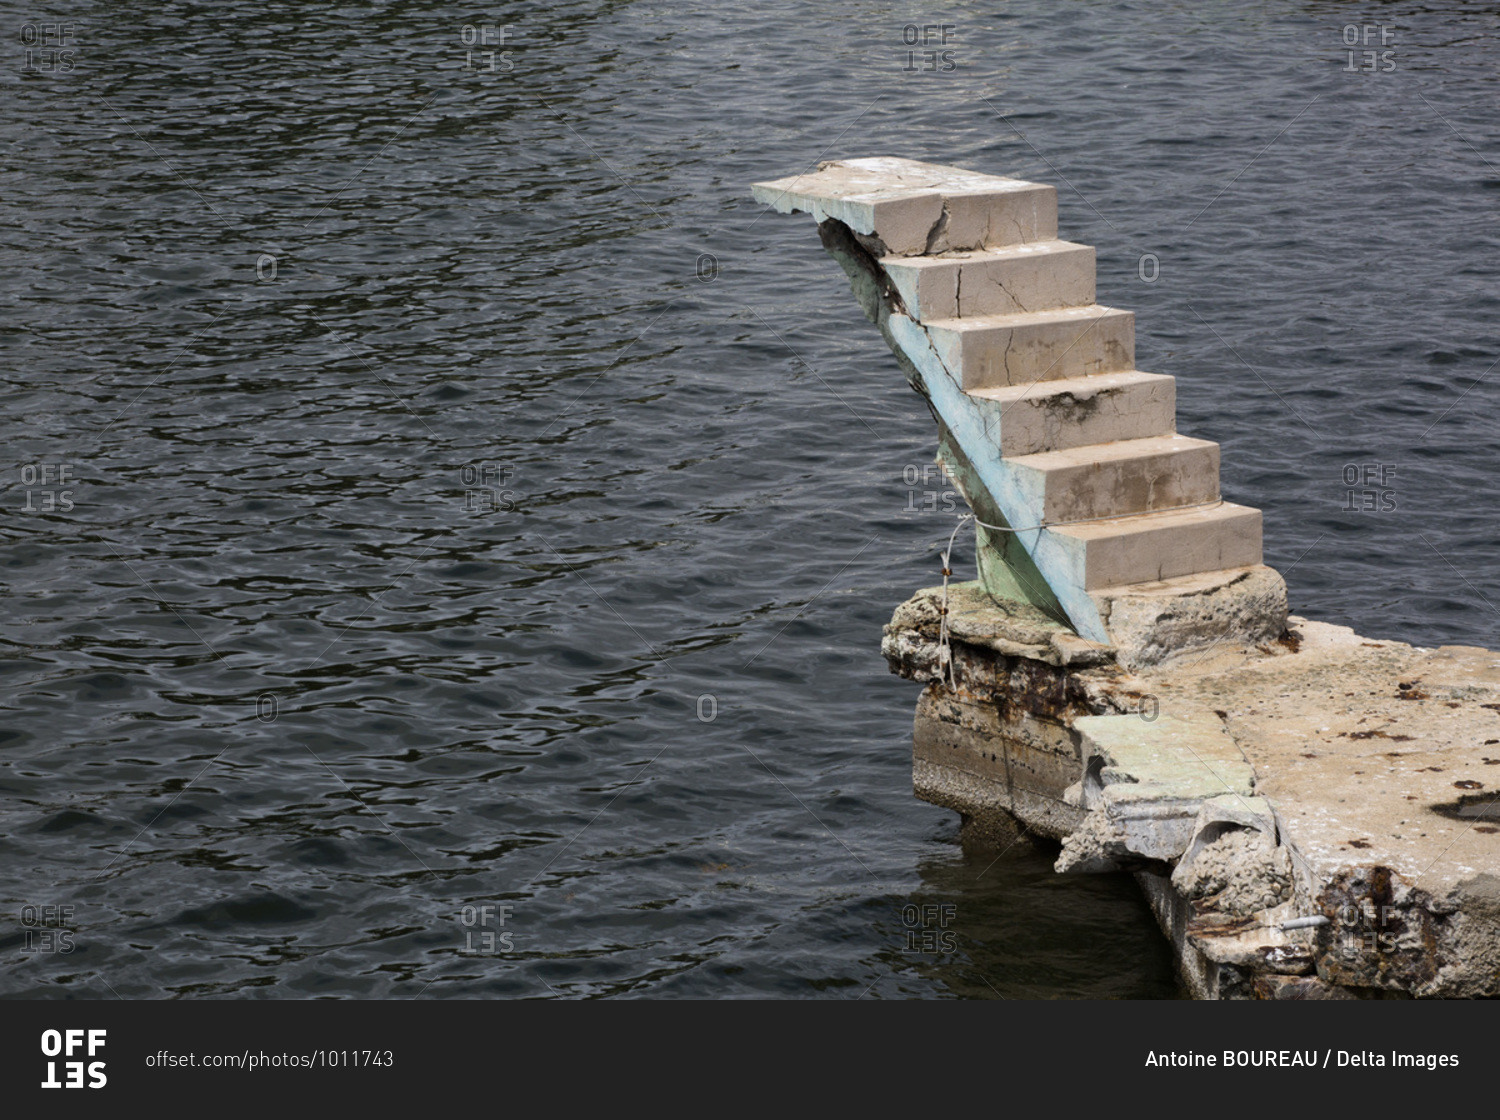 Concrete staircase built to allow access to a swimming pool located just above the sea but the project was abandoned, Santiago de Cuba, Cuba